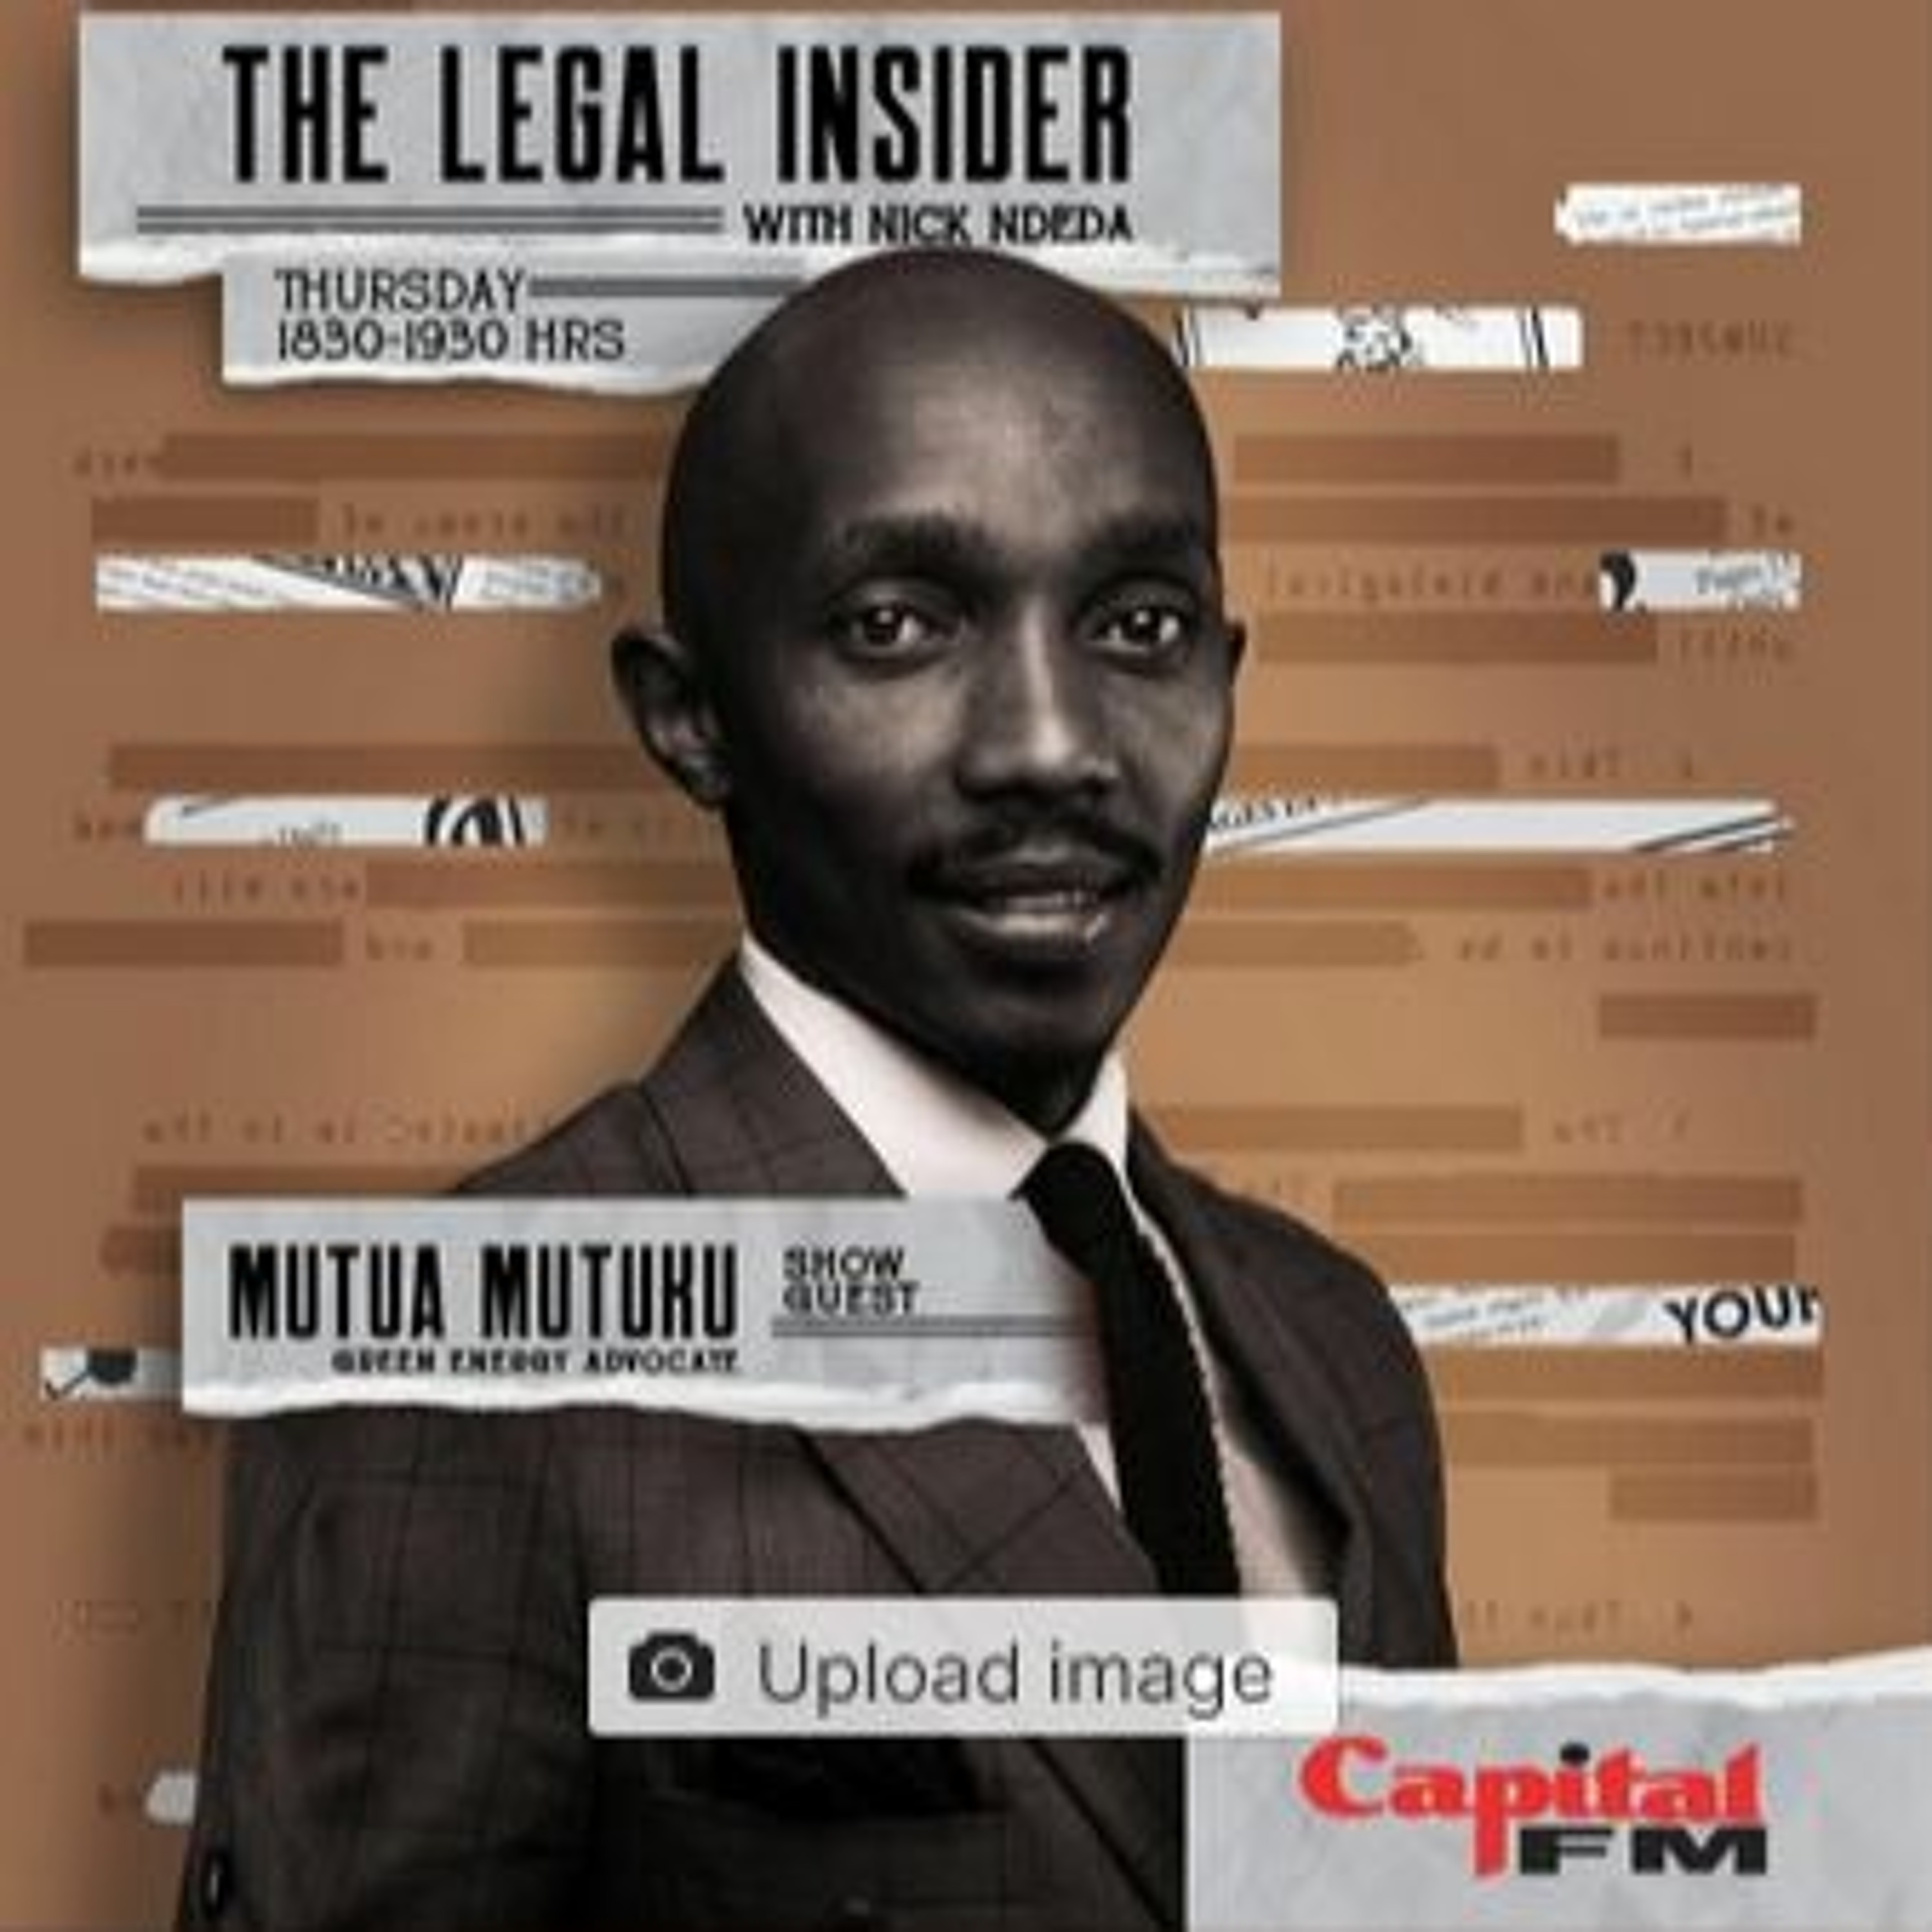 The Legal Insider S03 E05 Public Relations